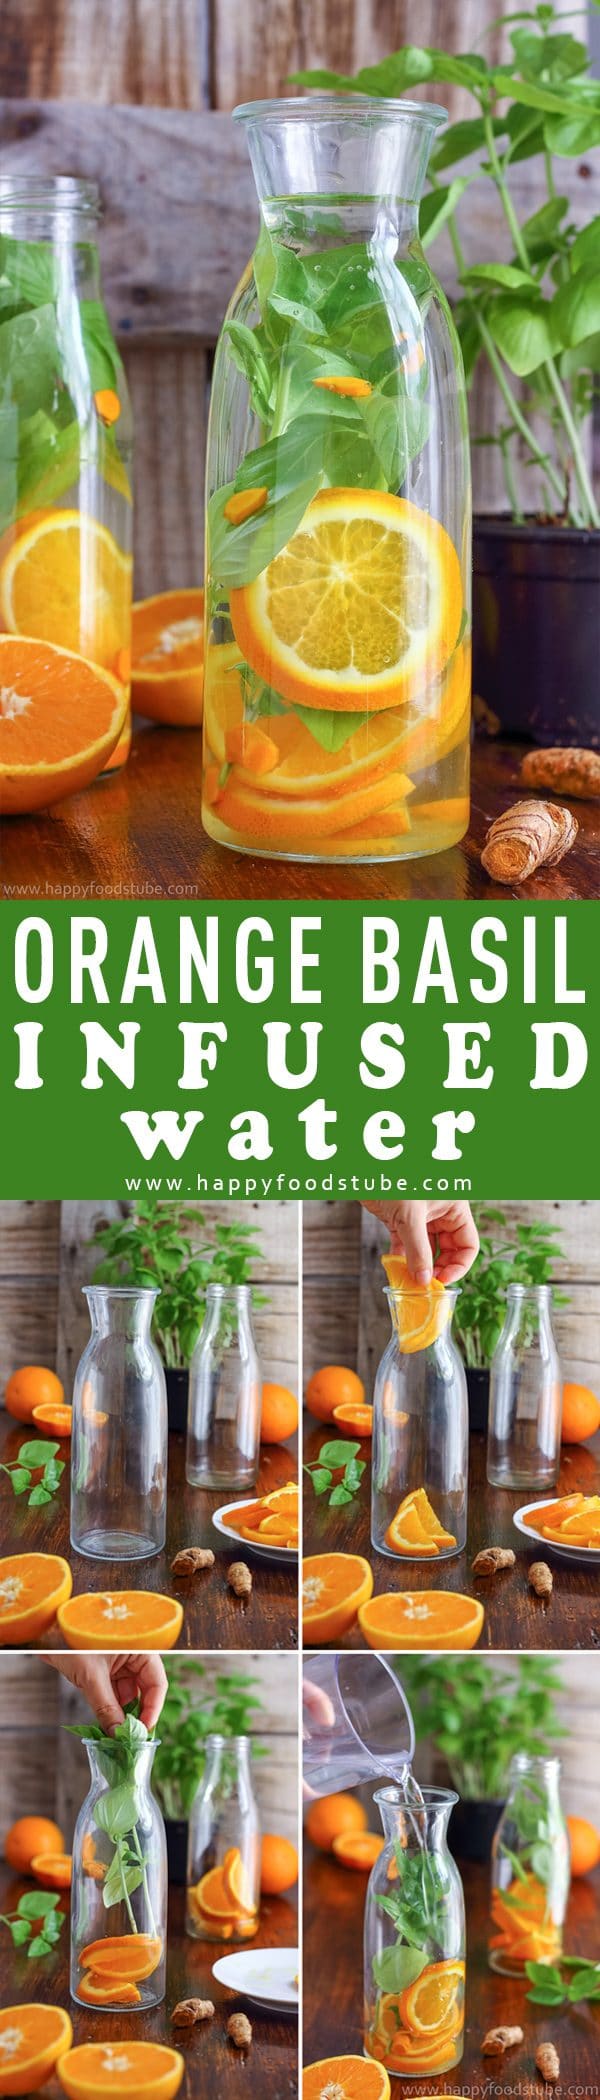 Orange Basil Infused Water Recipe Picture